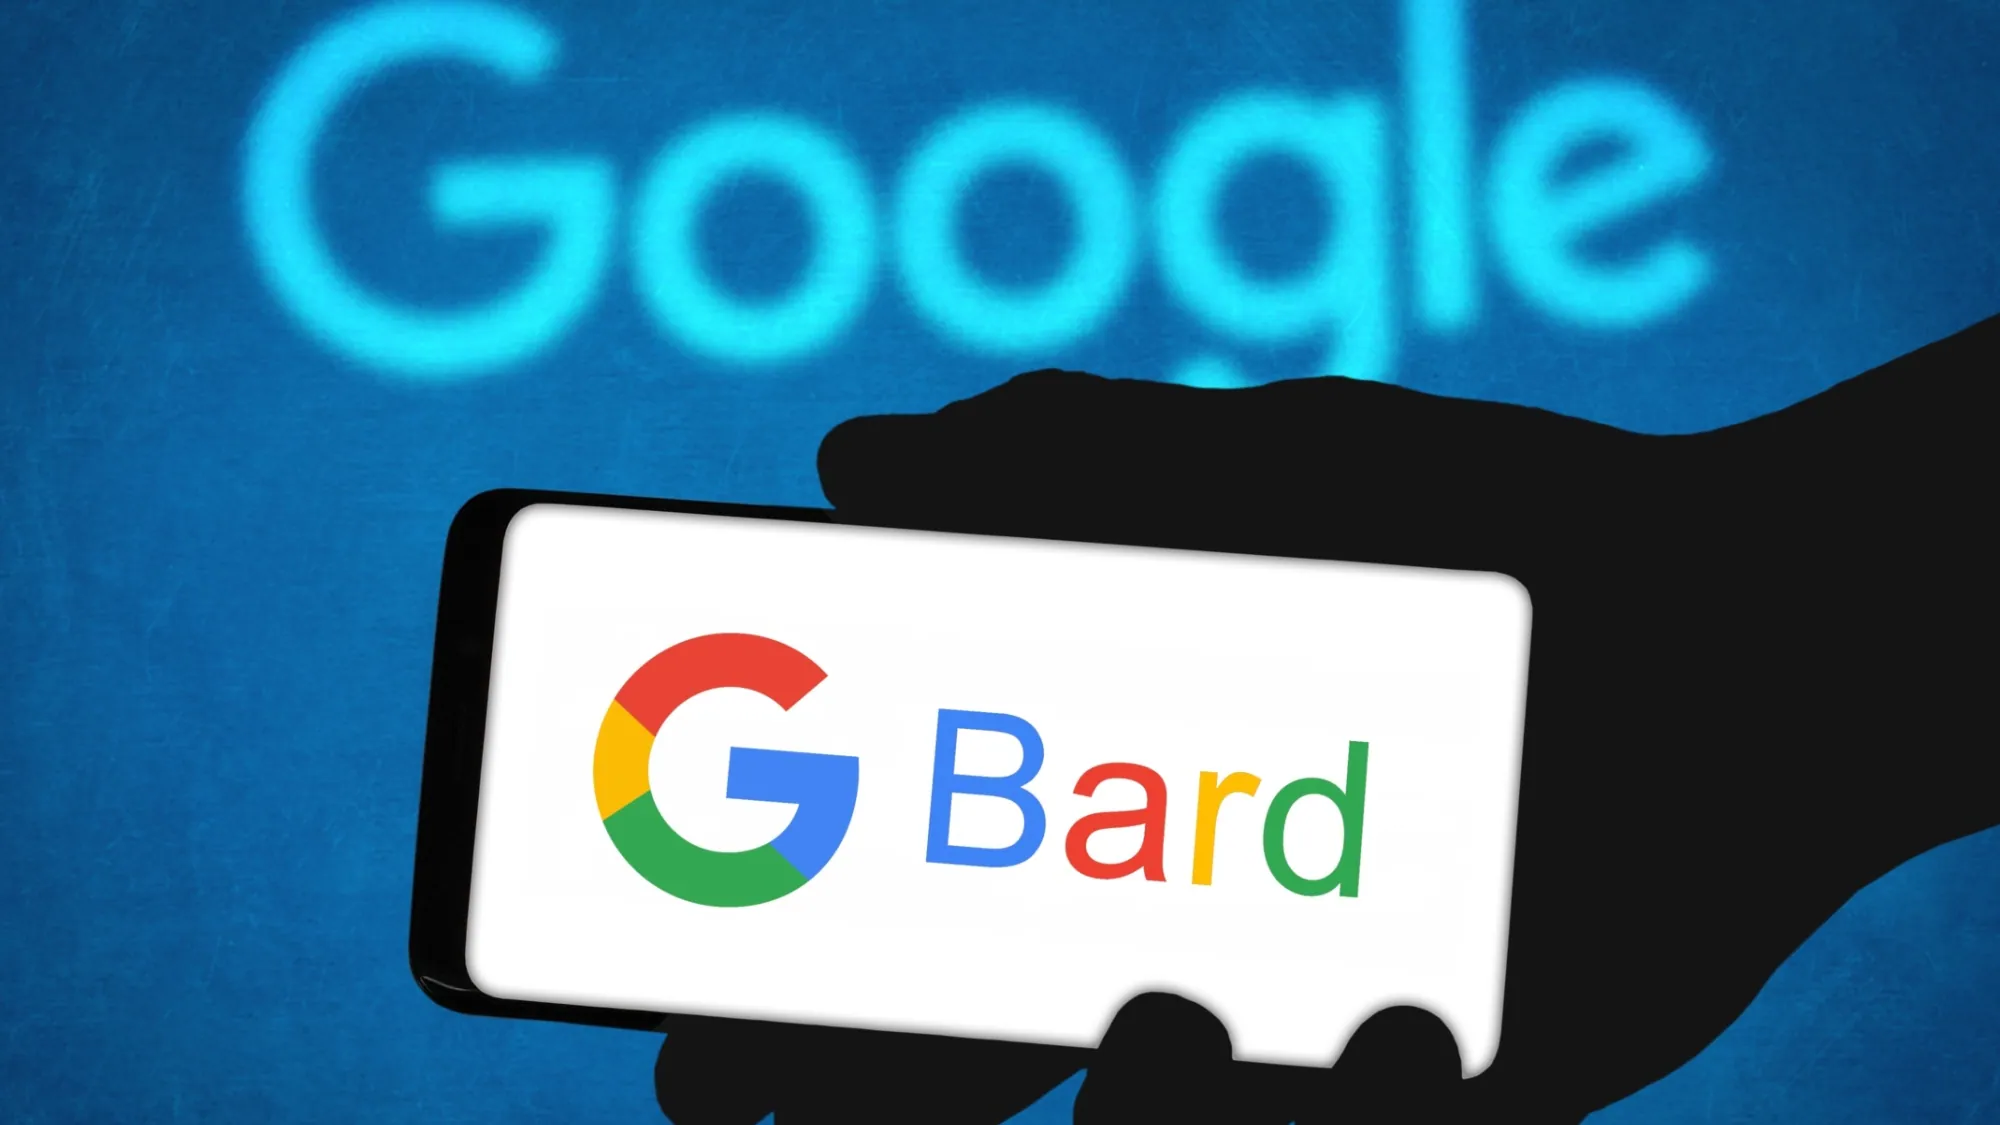 Can Google Bard Be Detected As Plagiarism?